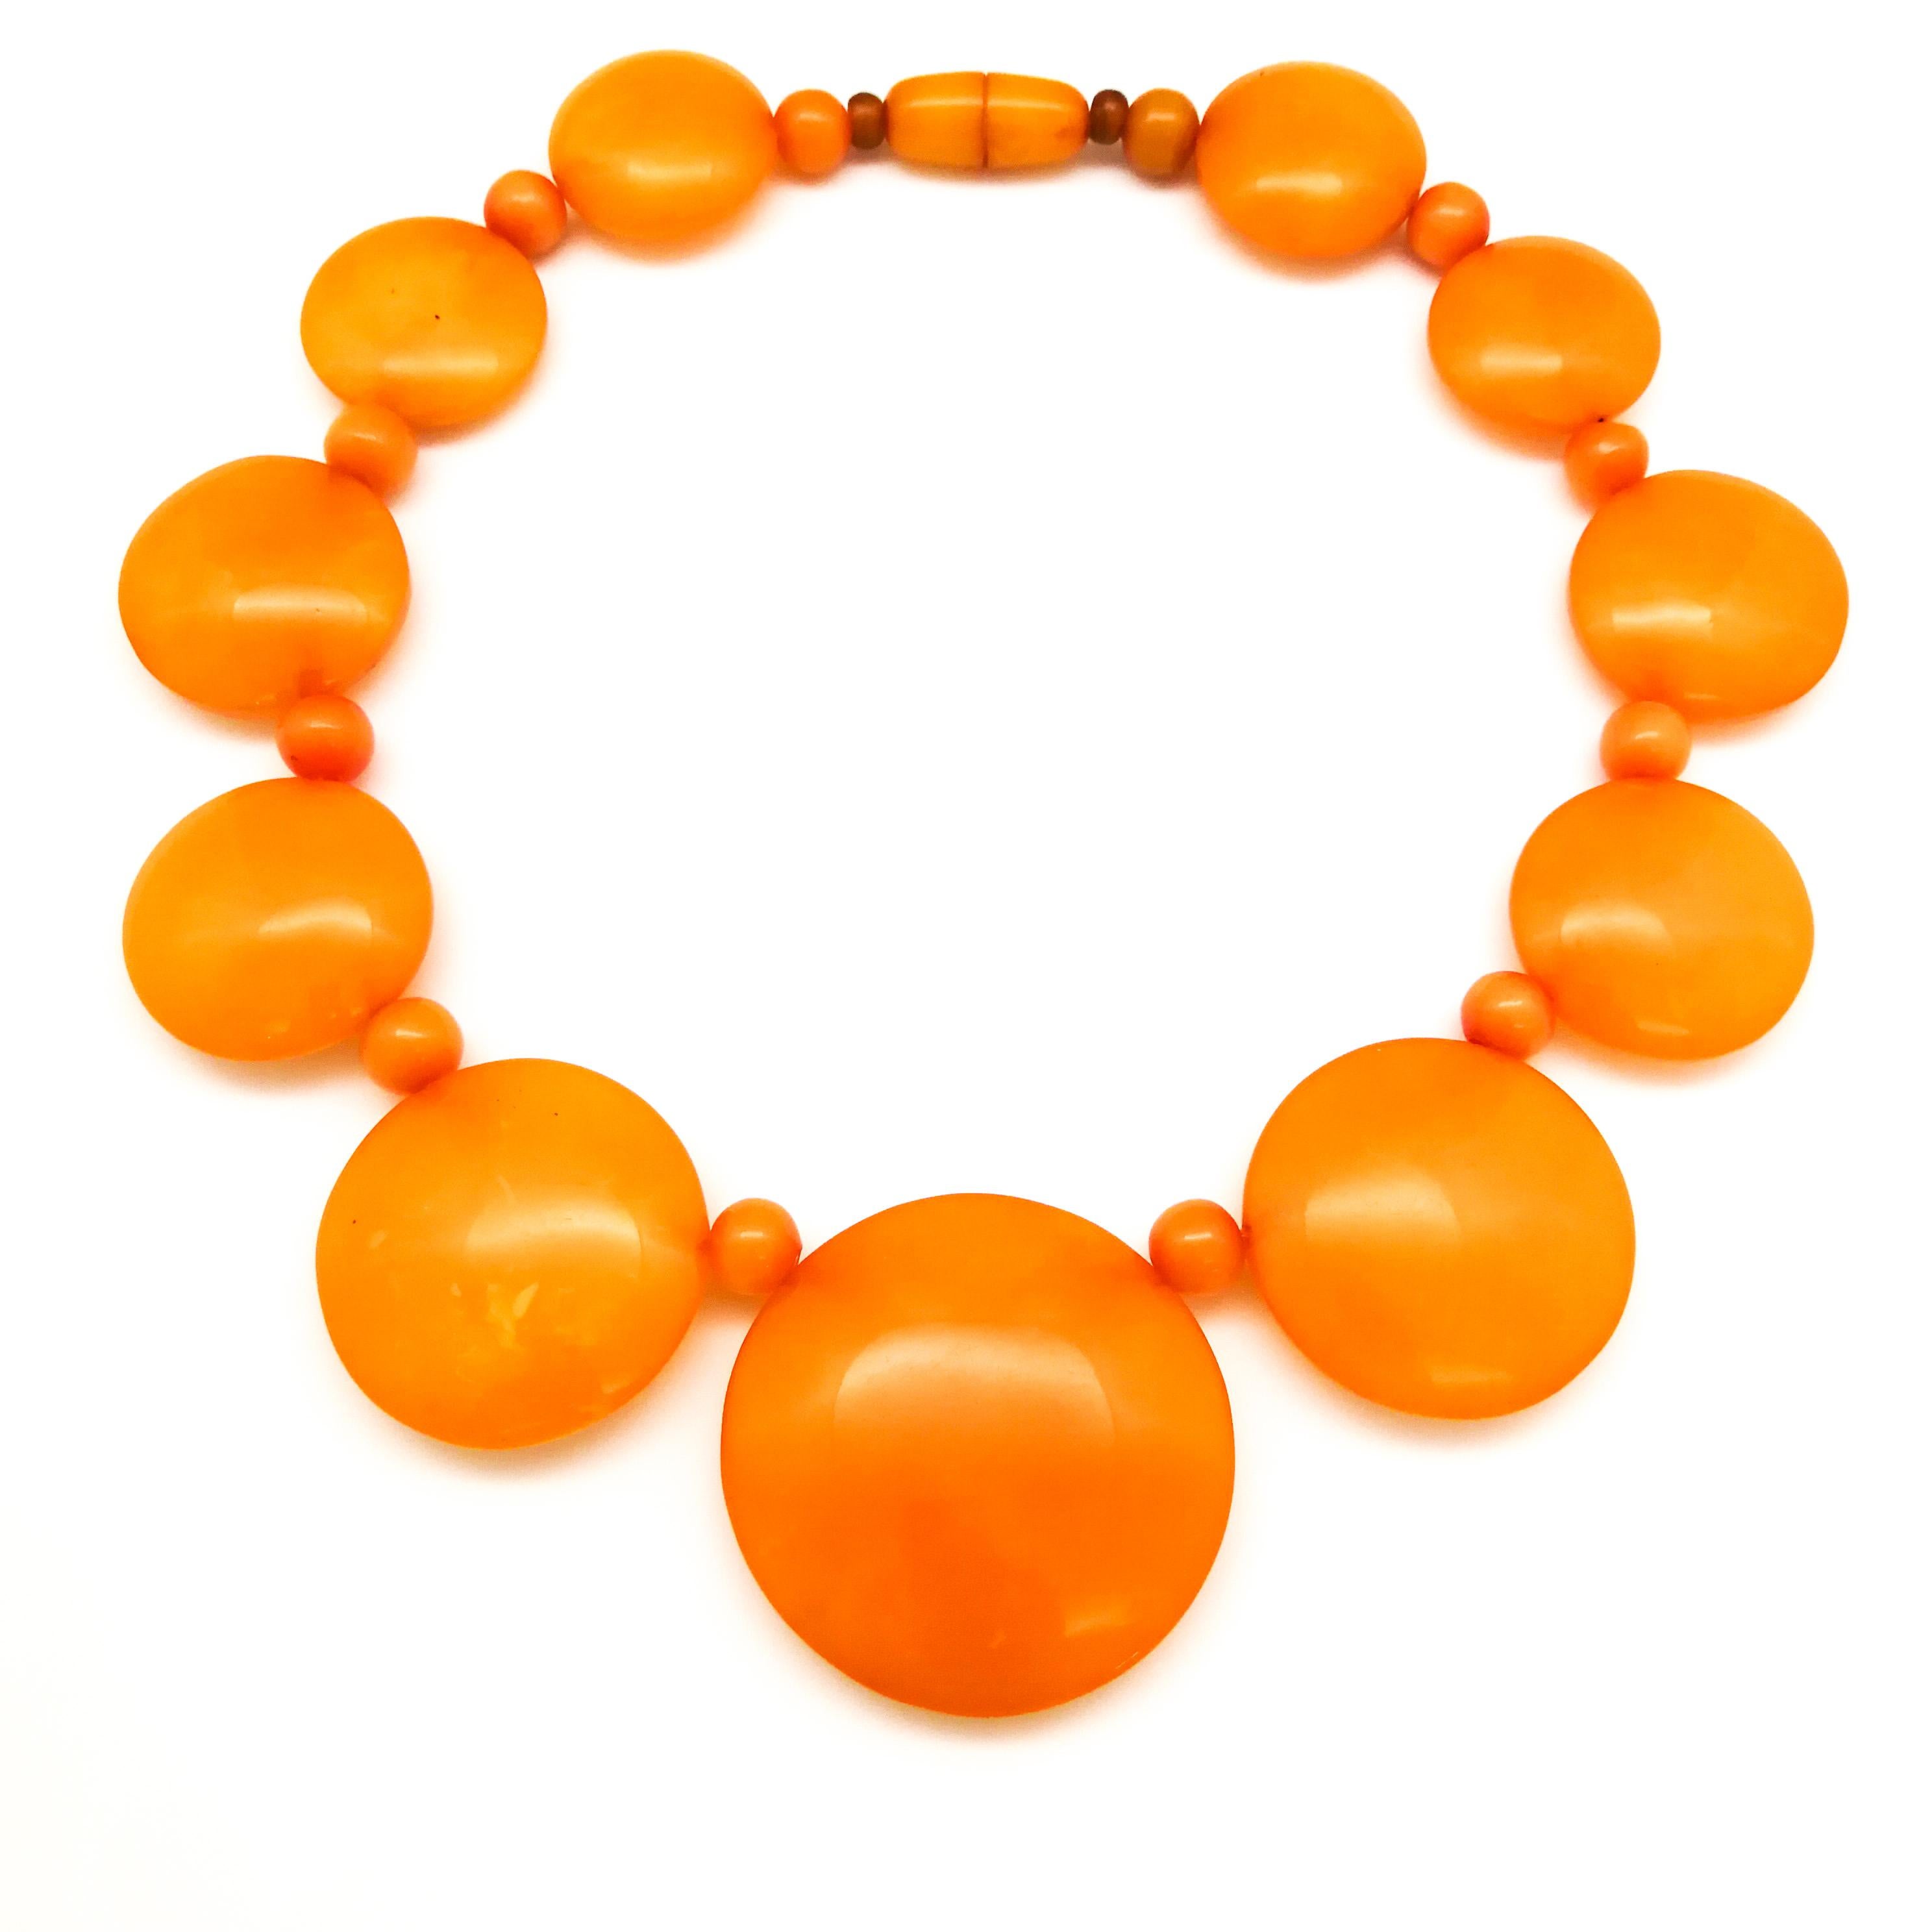 A wonderful bright orange Bakelite three piece parure/set, consisting of a graduated 'disc' necklace, a simple, solid bangle and a large and stylish ring, all in excellent condition, having travelled through time from the 1930s, remarkably